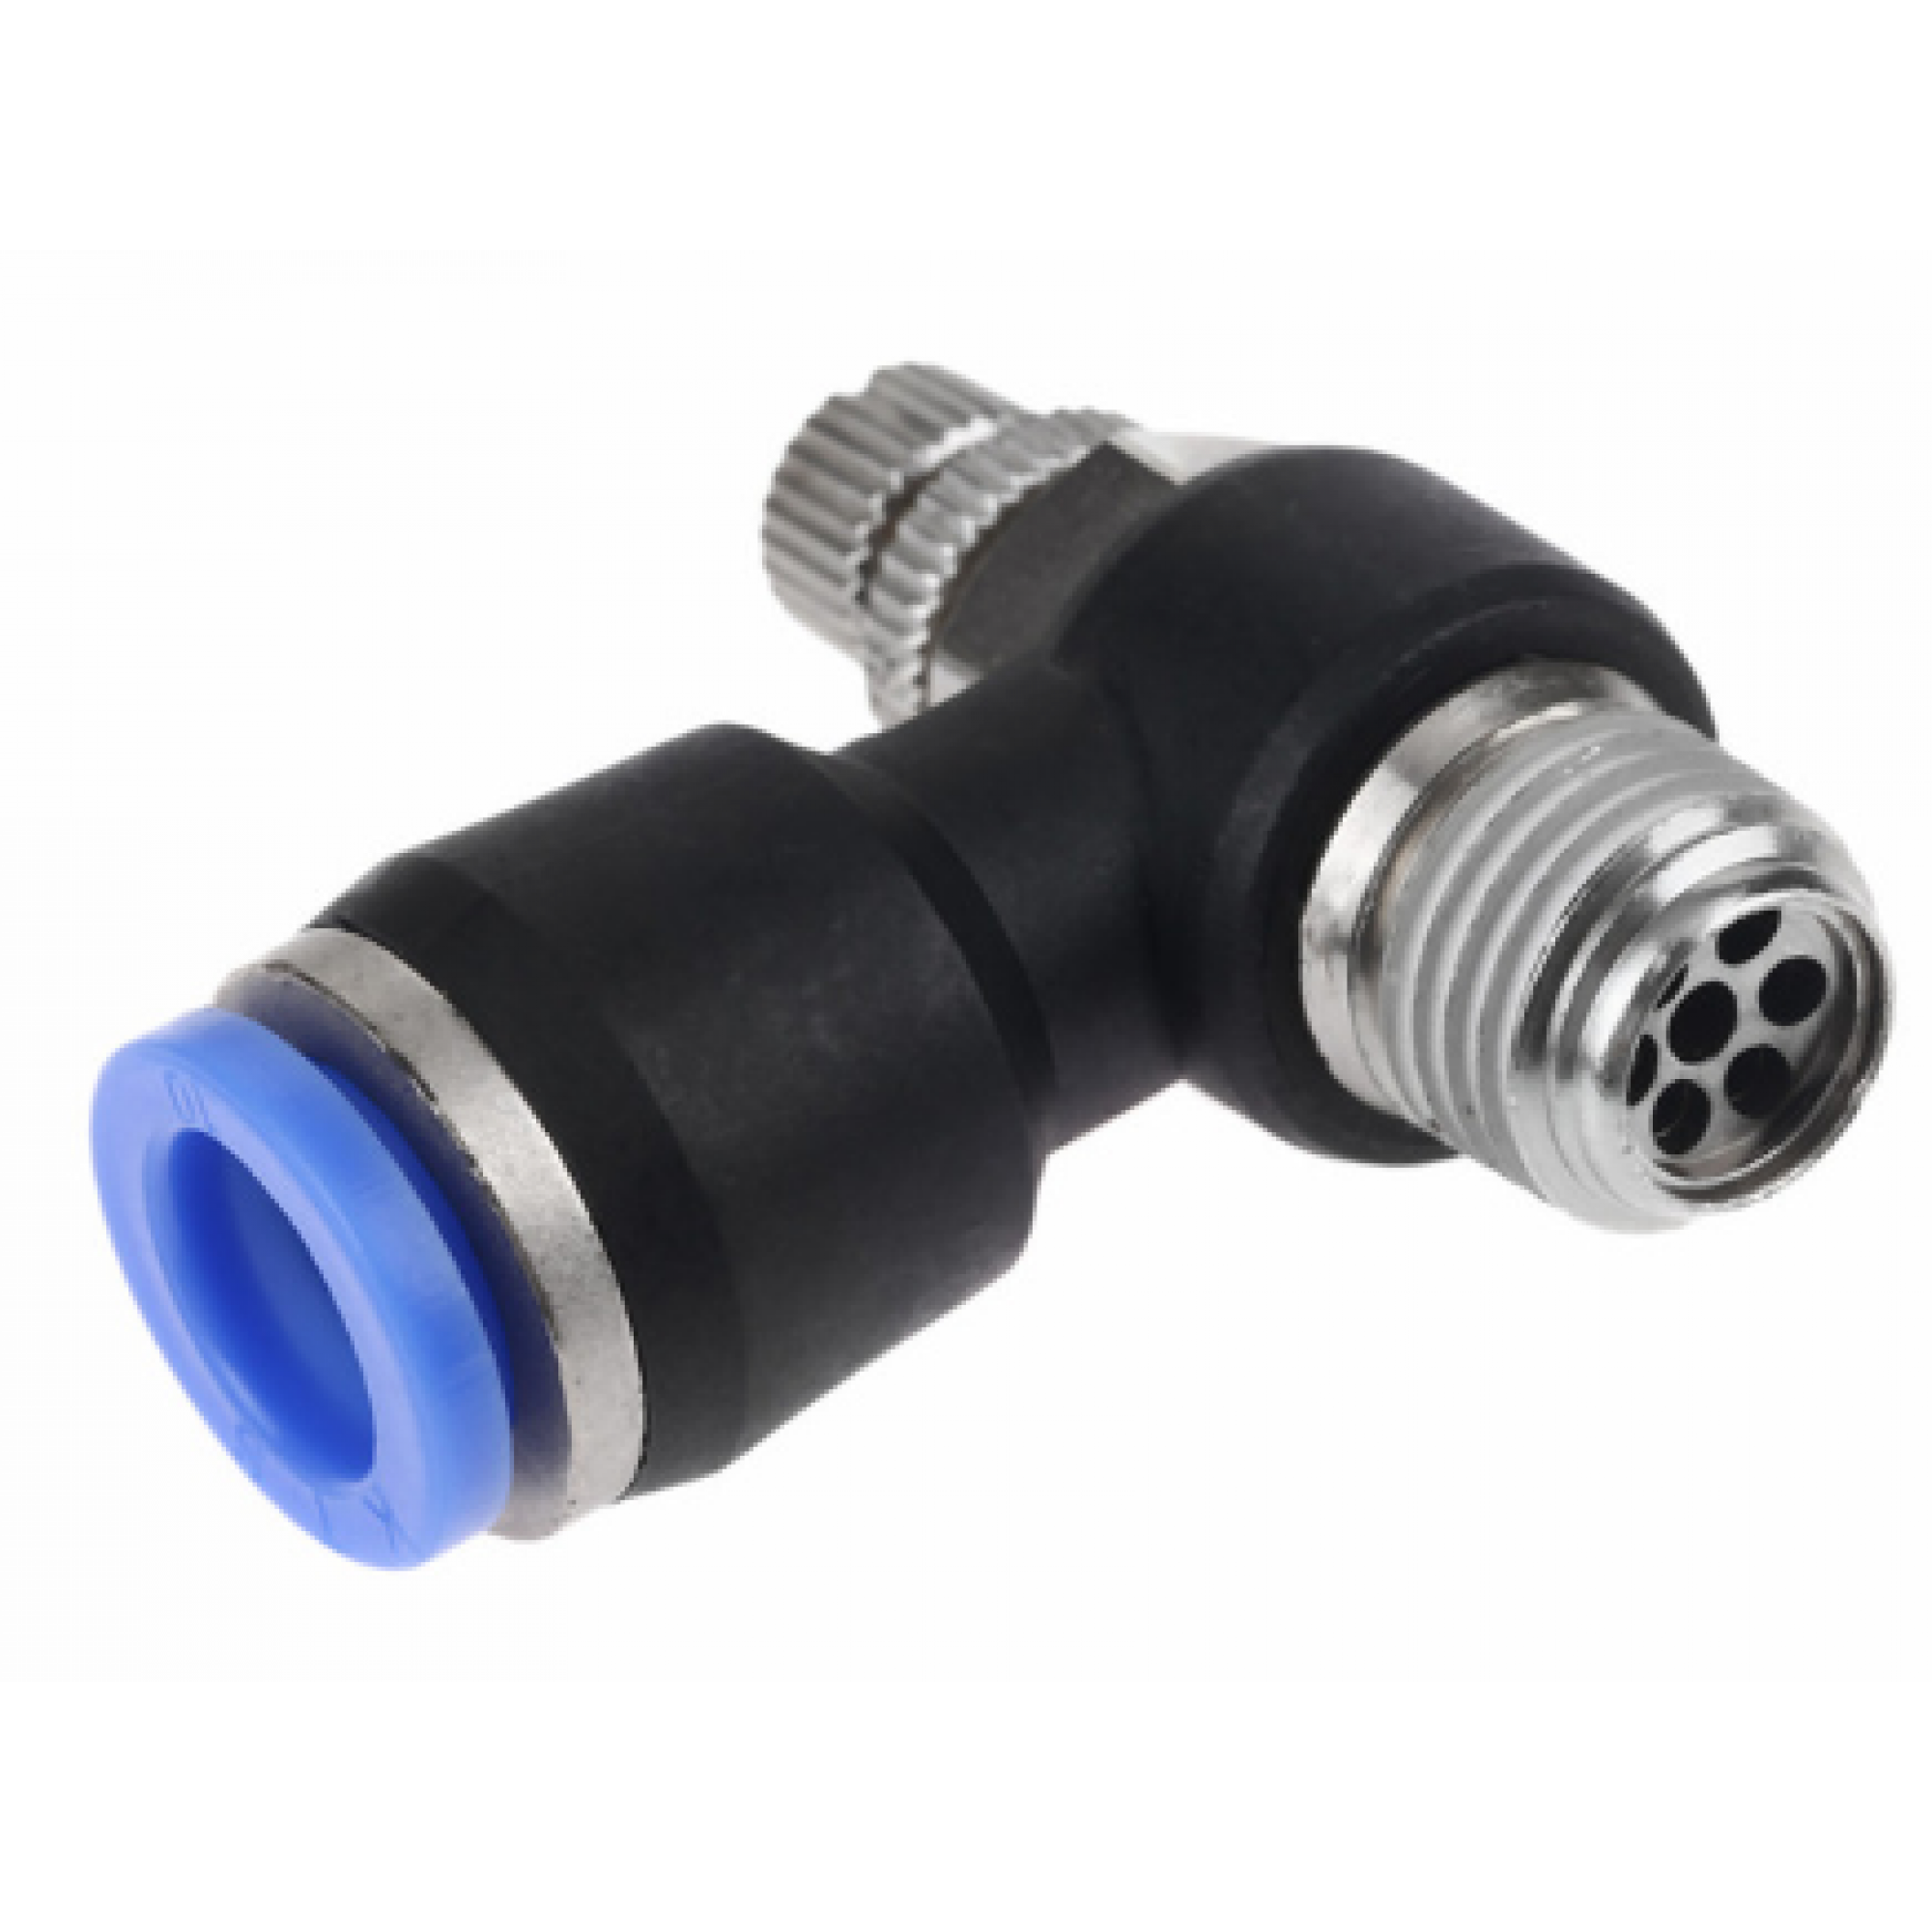 10mm Pneumatic Flow Control Connector Push In Fitting Air/Water Hose Tube 